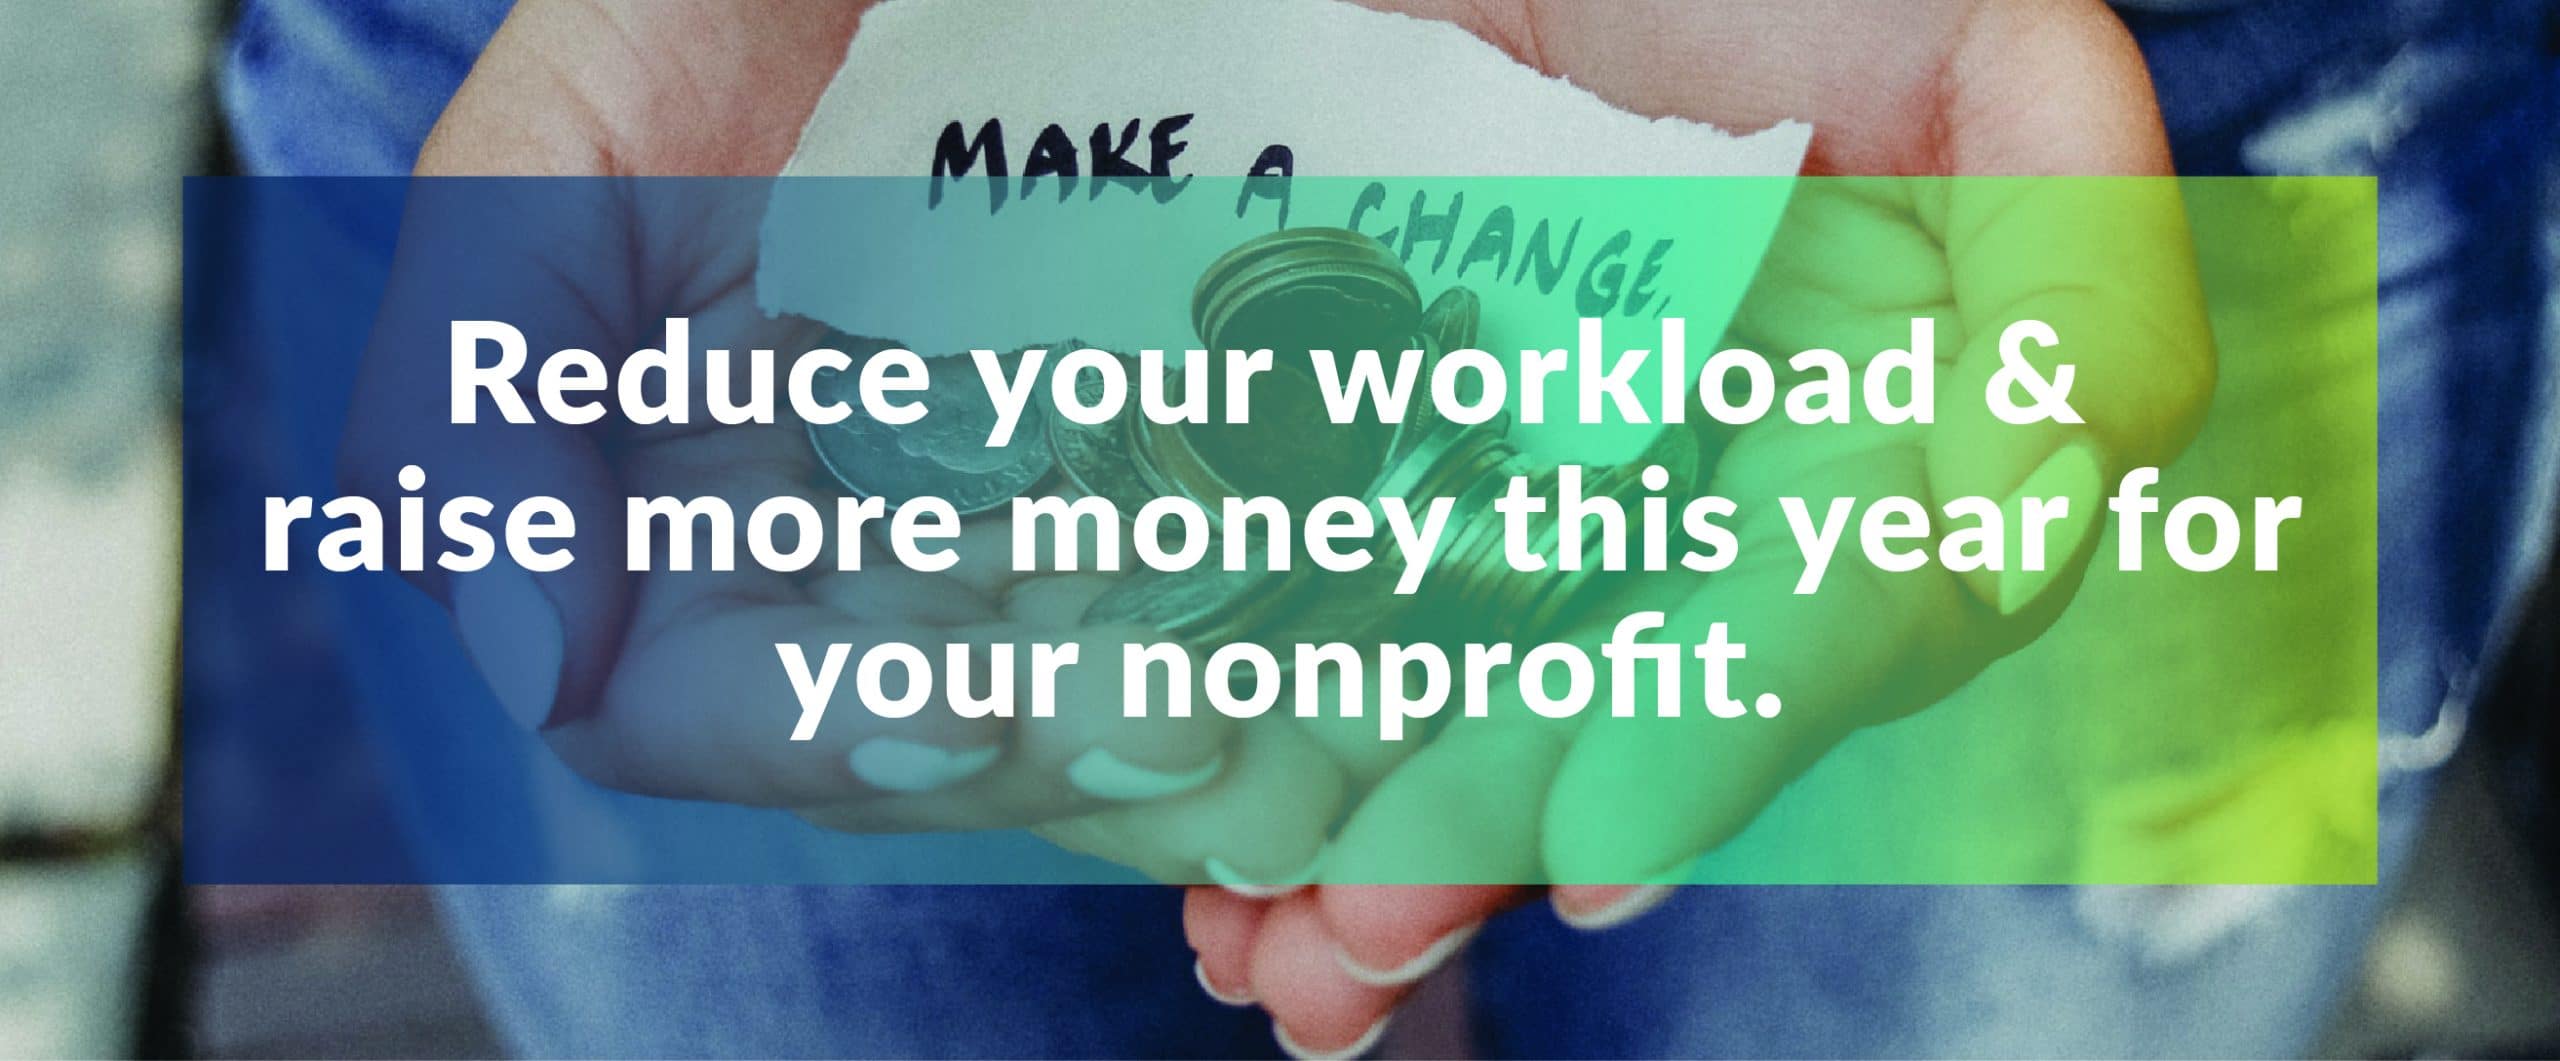 Reduce your workload & raise more money this year for your nonprofit